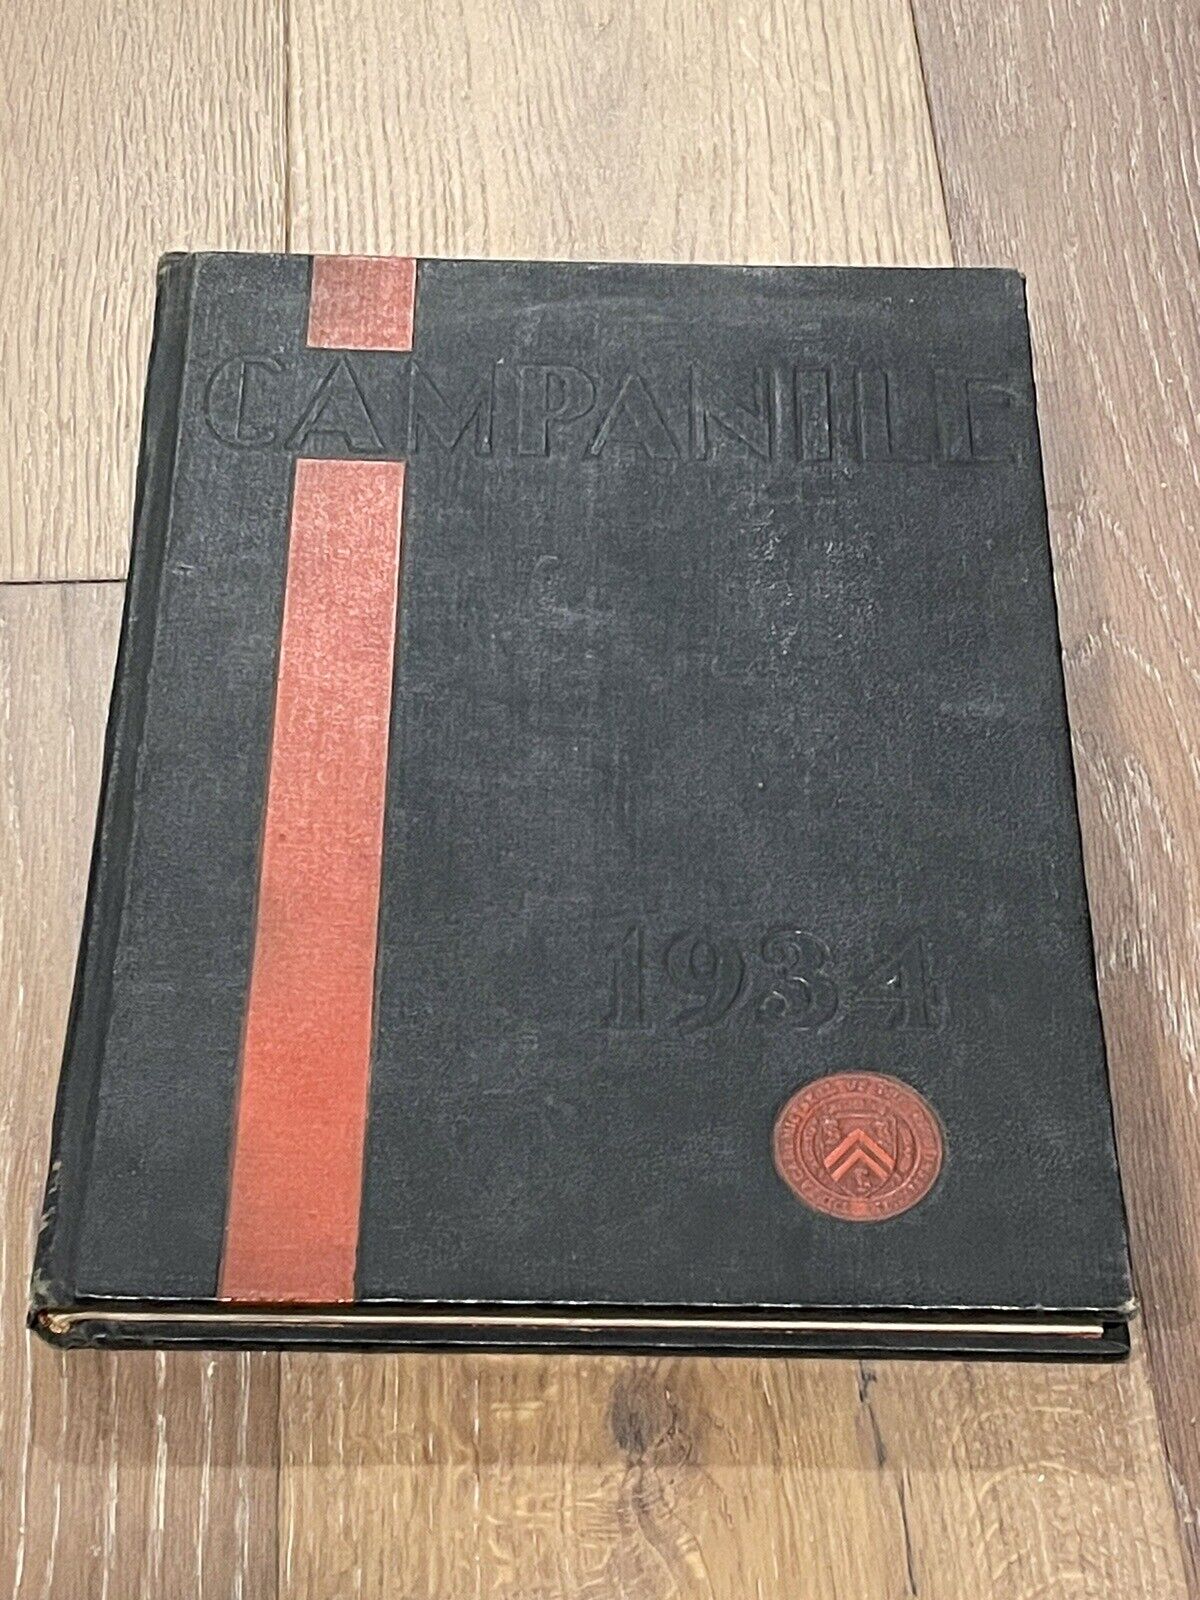 Rare Old Vintage Yearbook The Campanile 1934 The Rice Institute, Houston Texas